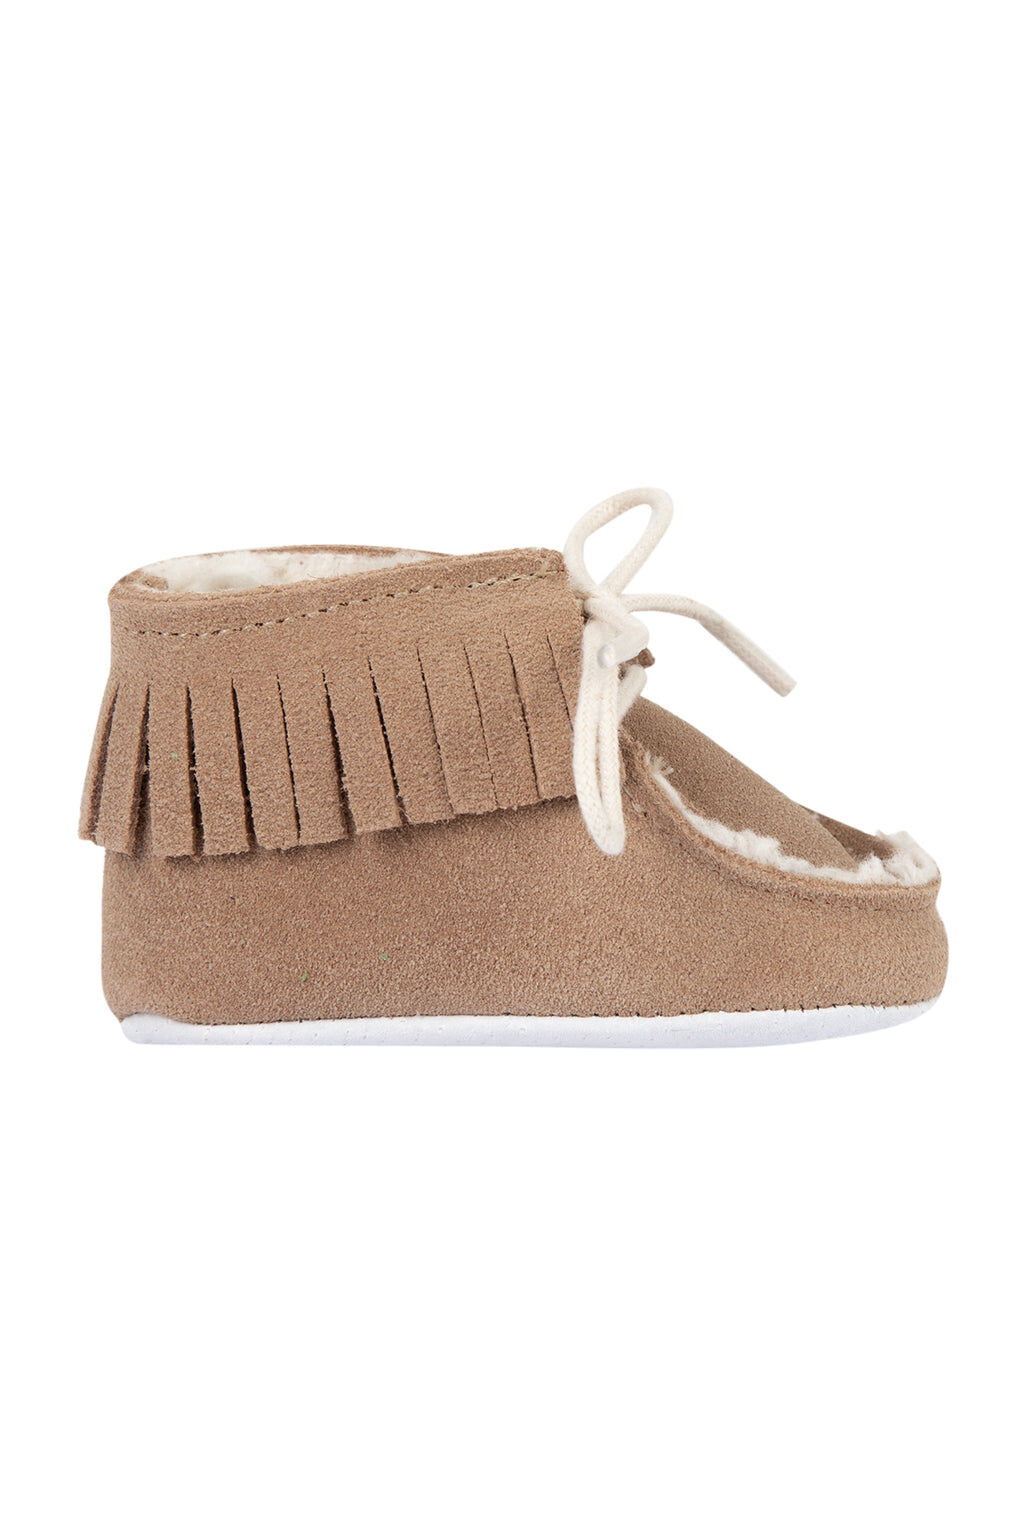 Chaussons - Beige franges